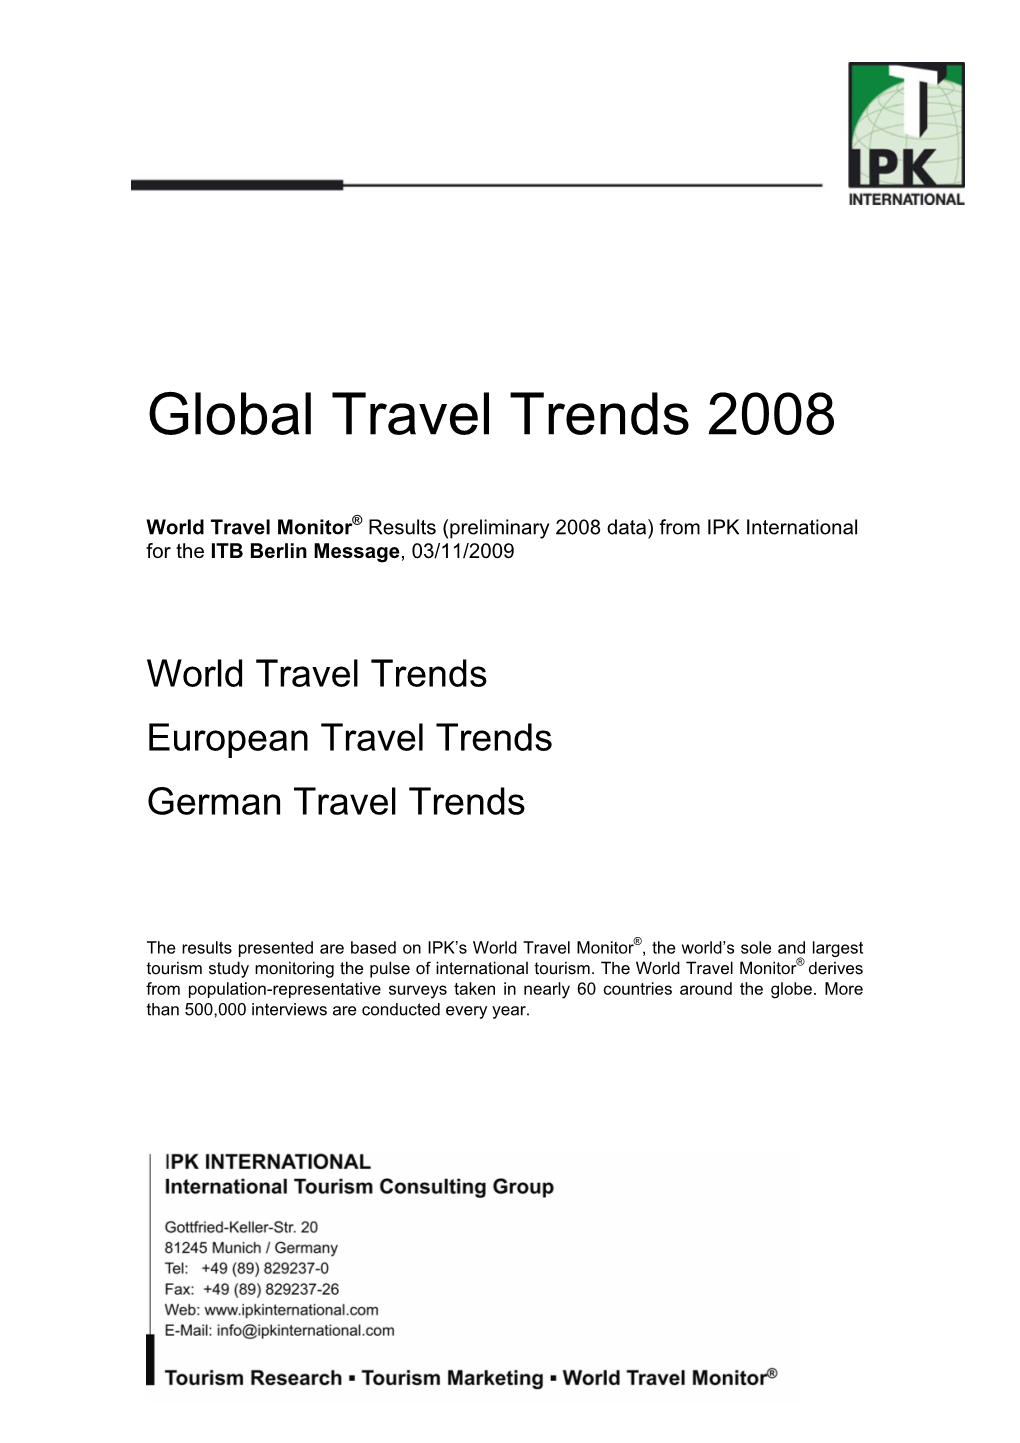 Global Travel Trends 2008